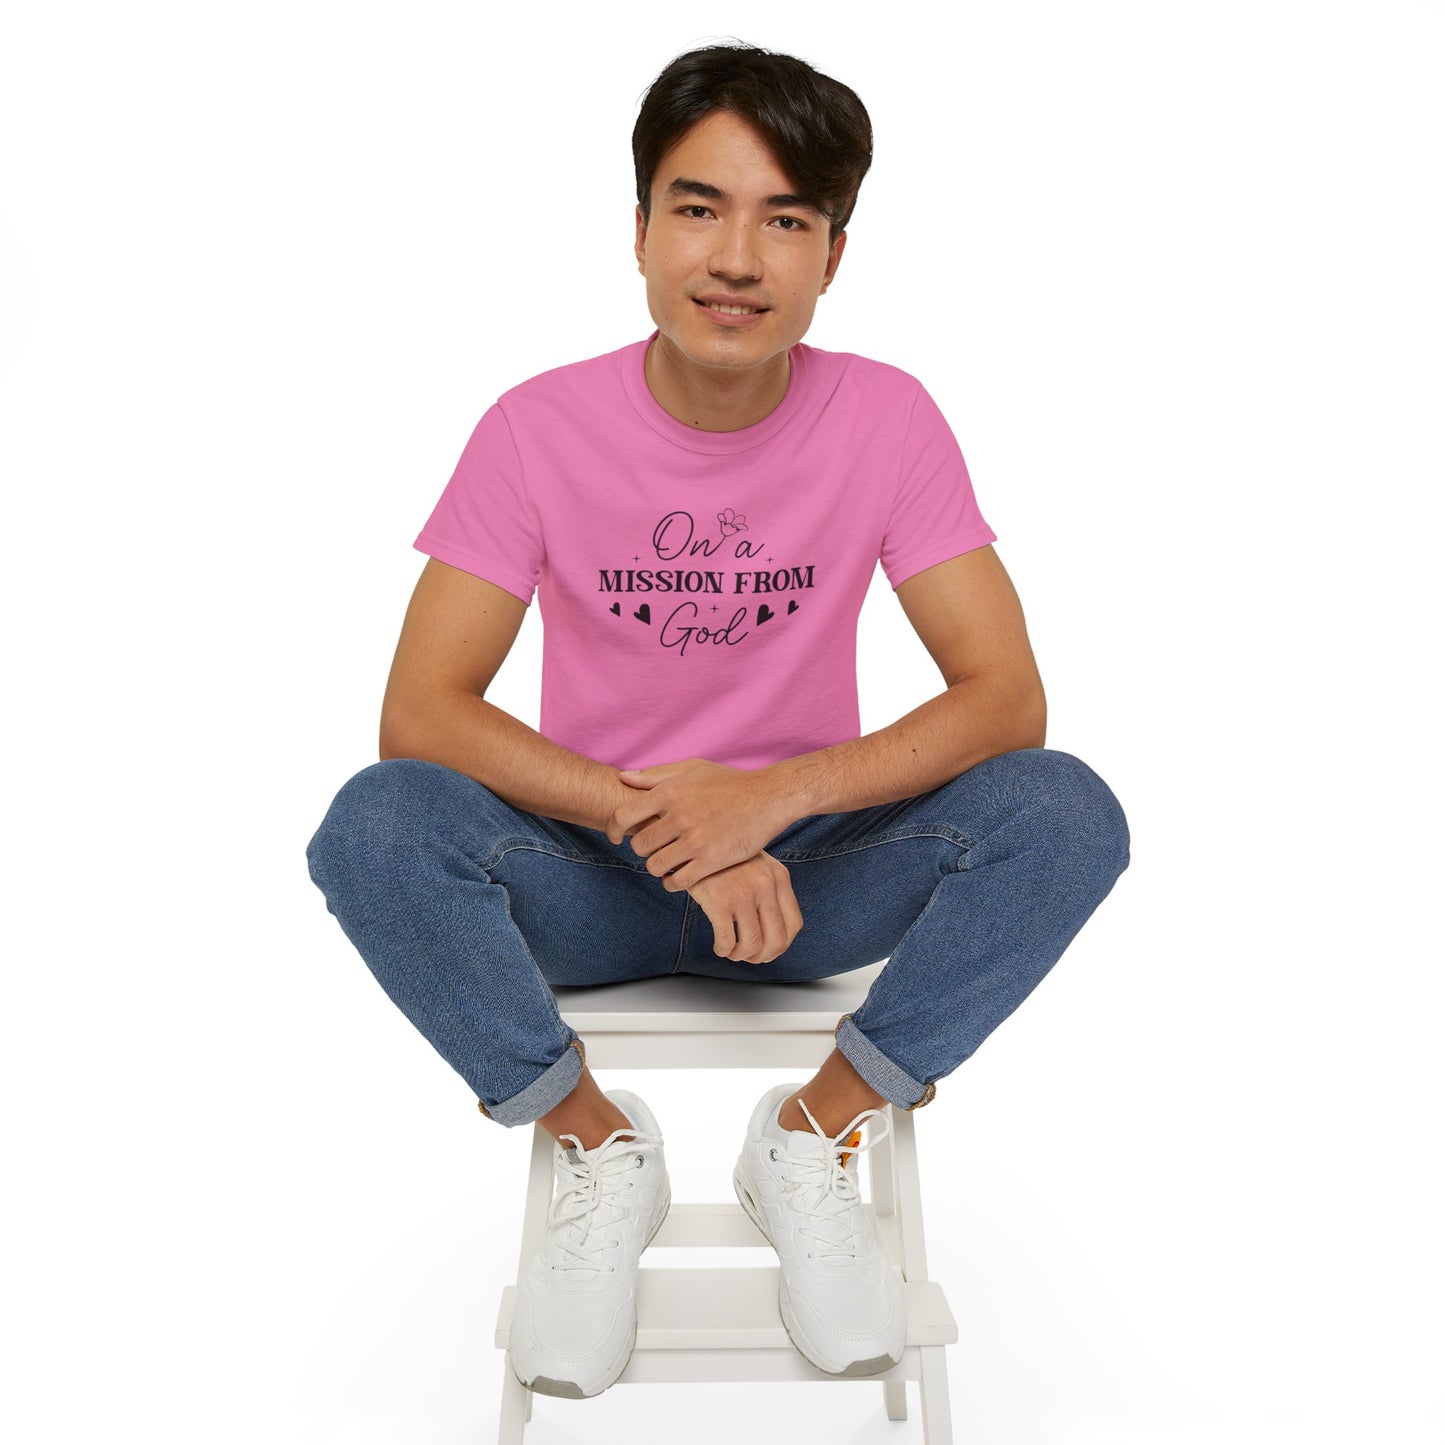 On A Mission From God Unisex Christian Ultra Cotton Tee Printify